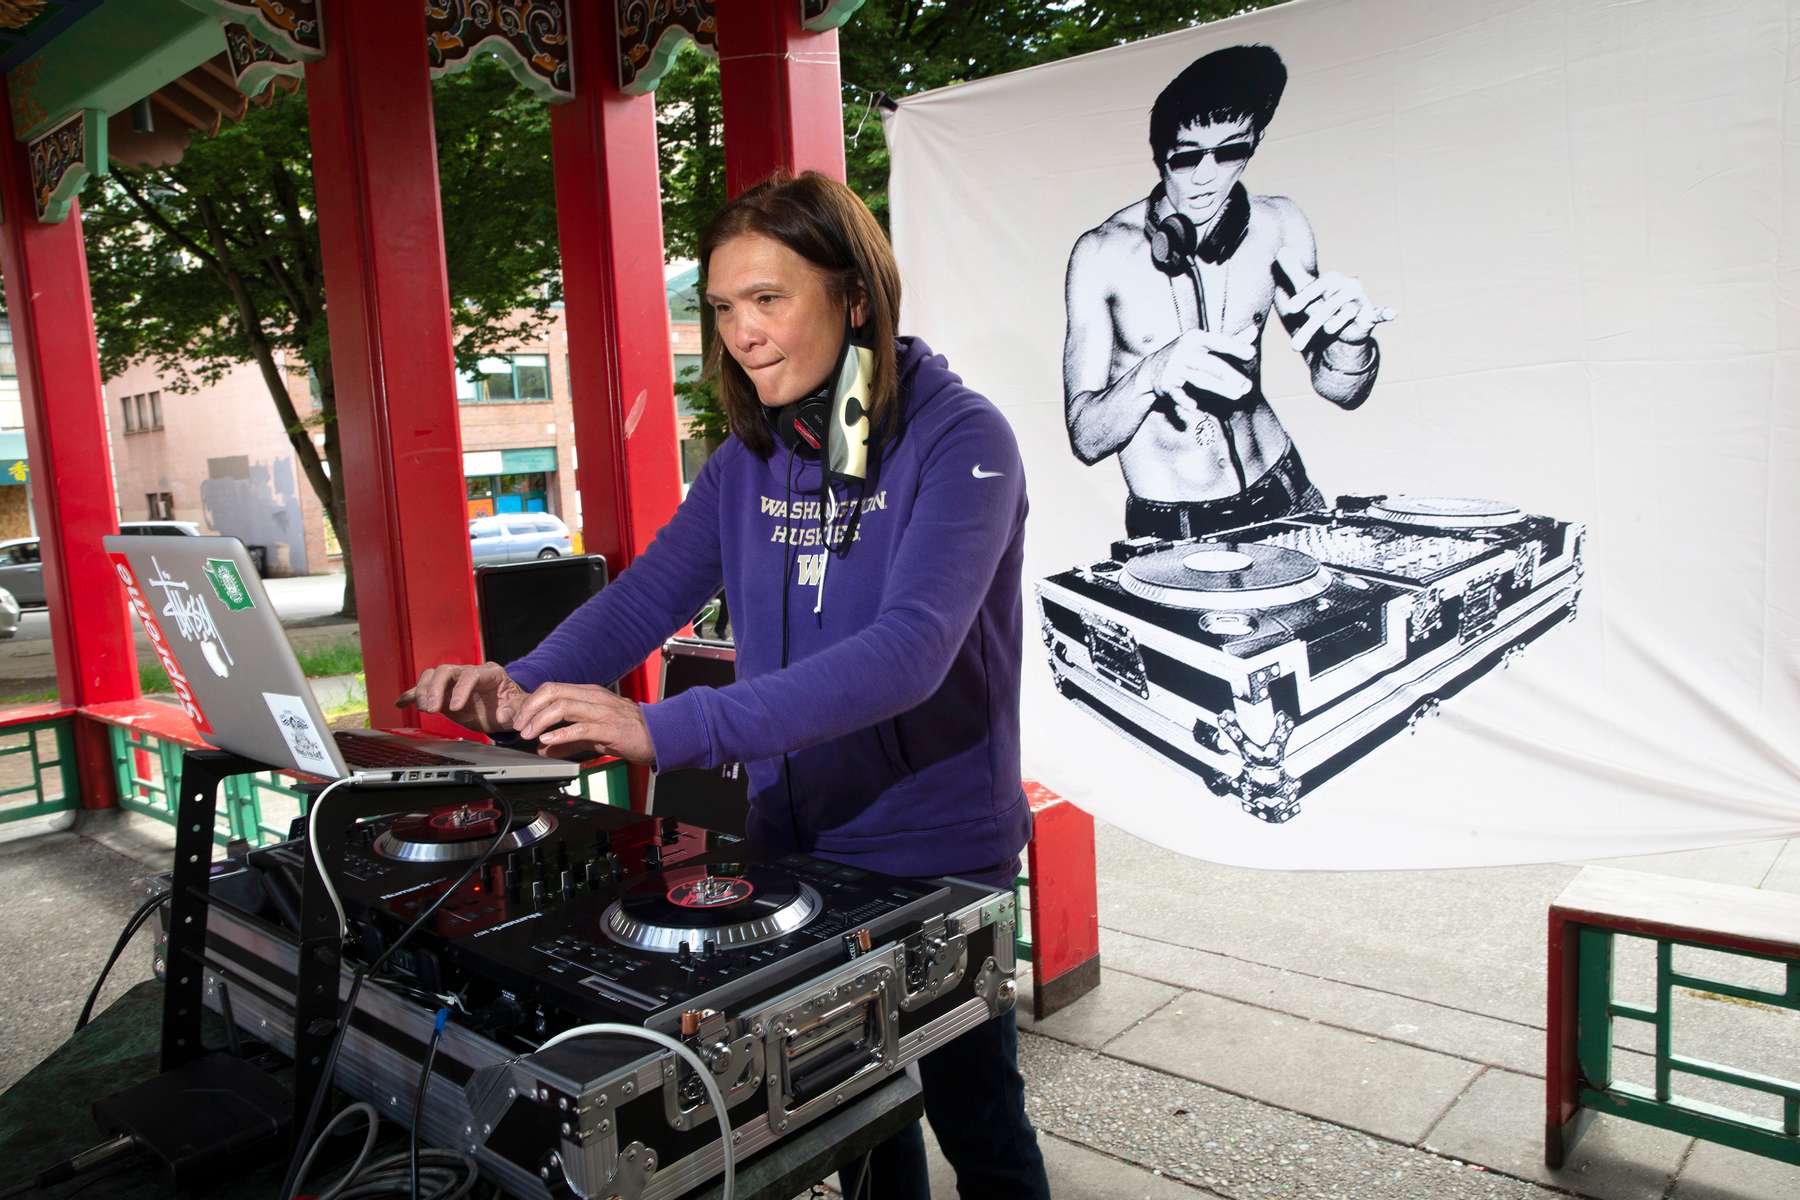 Sheila Locke from NastyMix Entertainment spins some Asian fusion tunes at Hing Hay Park during a community arts event in the Chinatown-International-District in Seattle Washington on June 14, 2020. Dozens of artists came together to paint murals in support of the Black Lives Matter movement on plywood at businesses that had been boarded up because of recent riots and the spread of coronavirus.